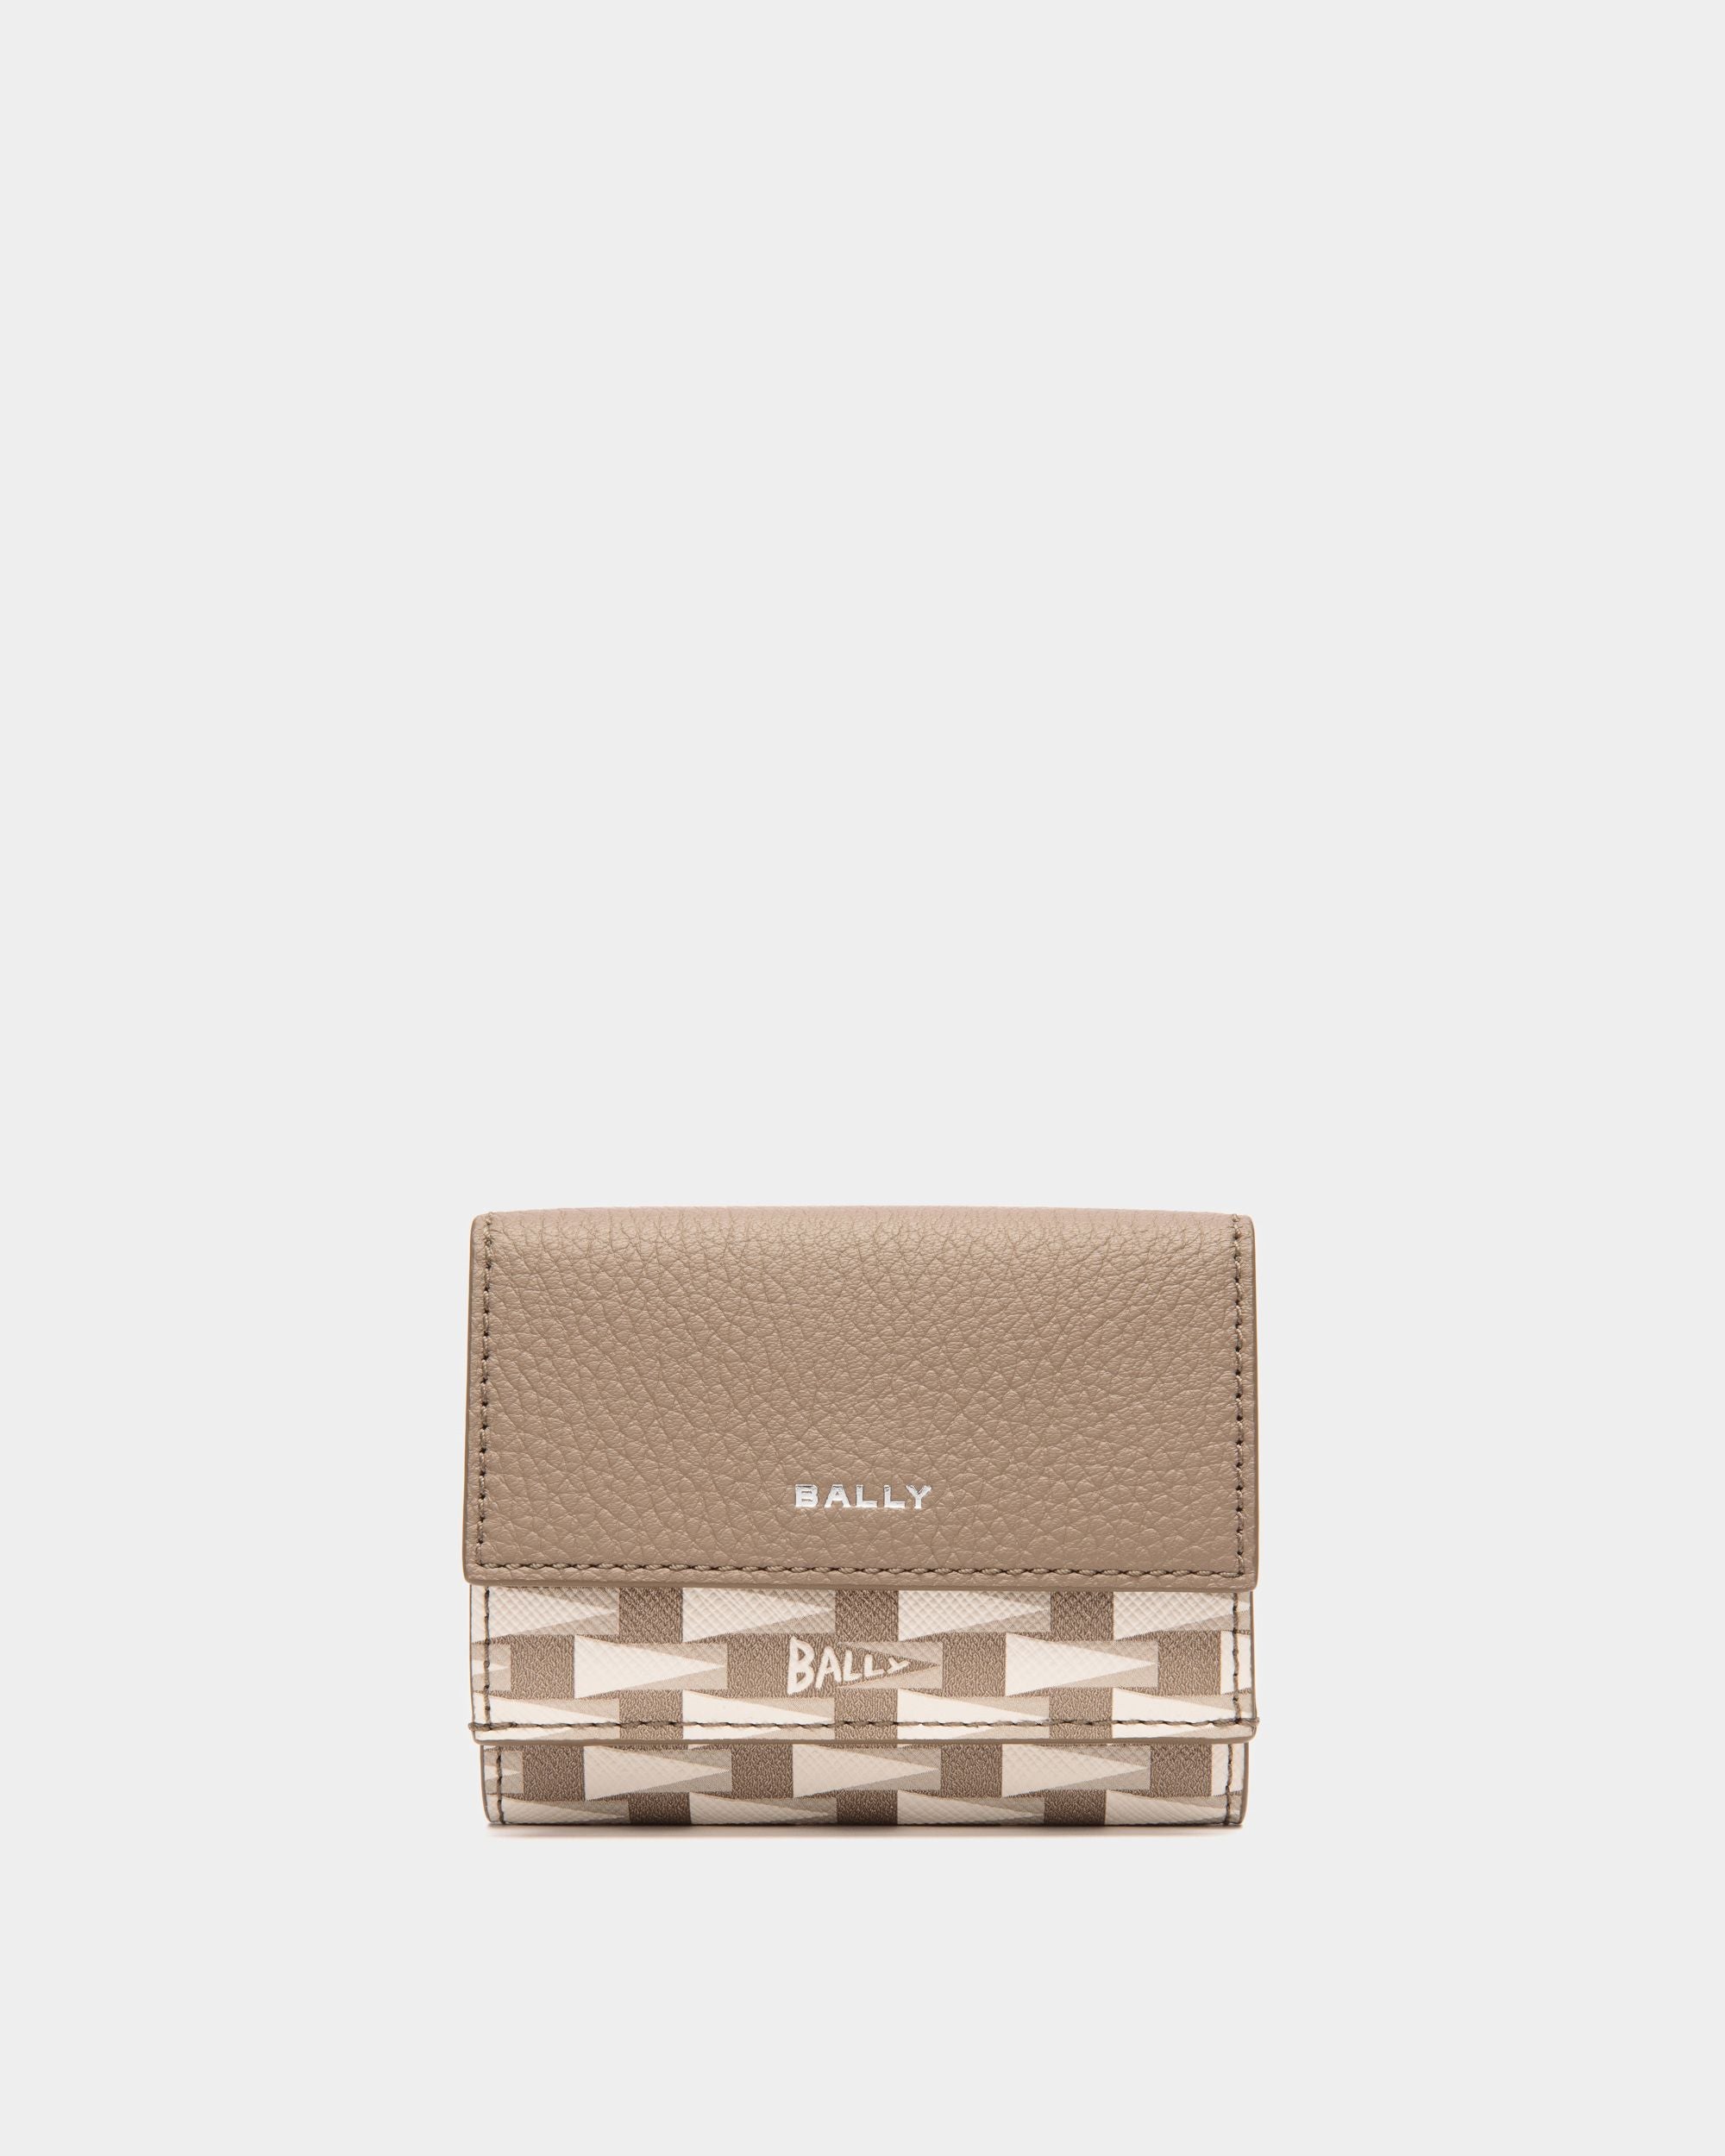 Pennant | Men's Trifold Wallet in Beige Pennant Motif TPU | Bally | Still Life Front